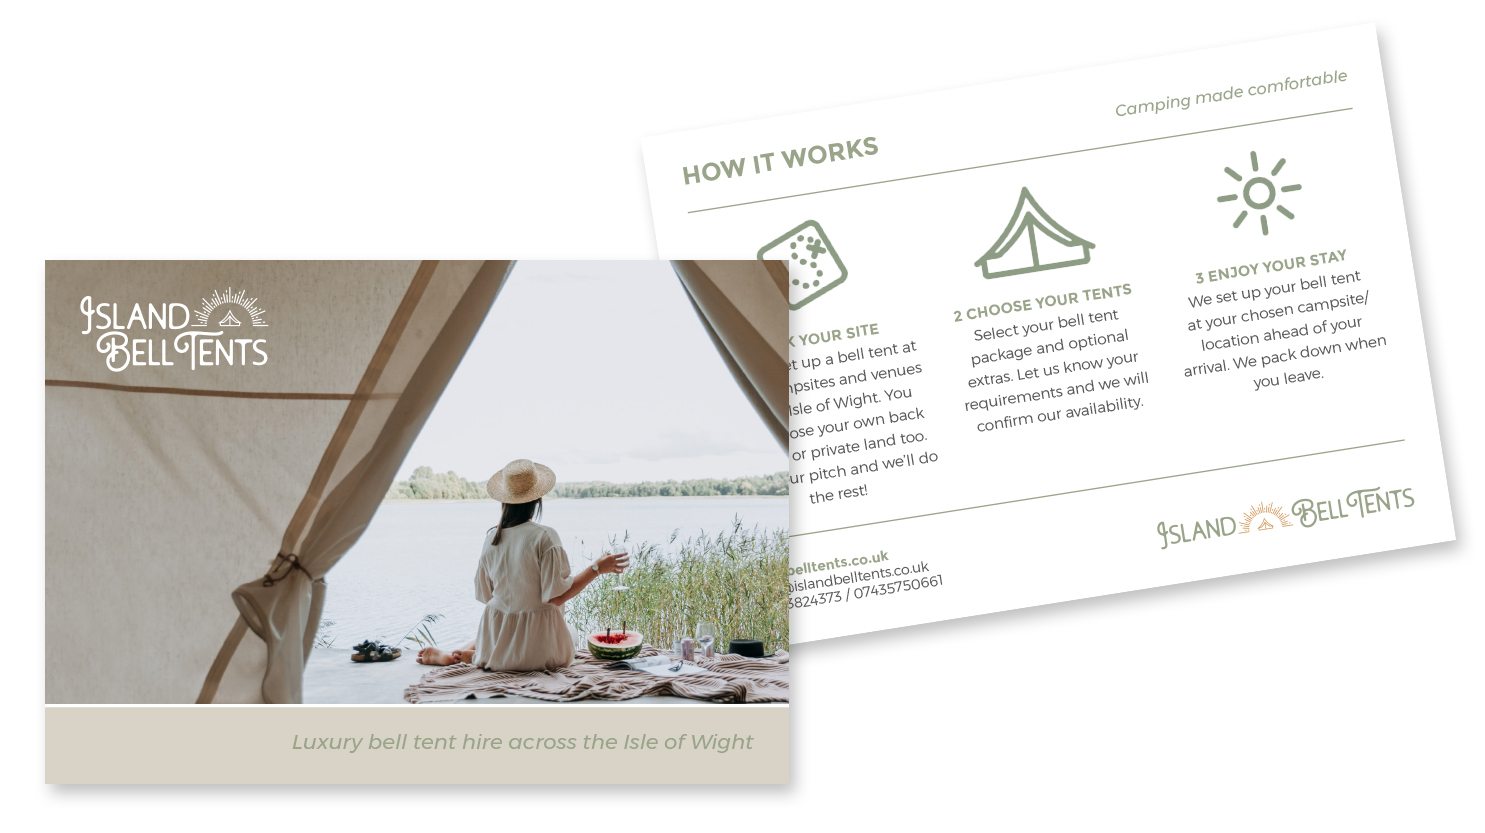 Leaflet design for Island Bell Tents, based on the Isle of Wight